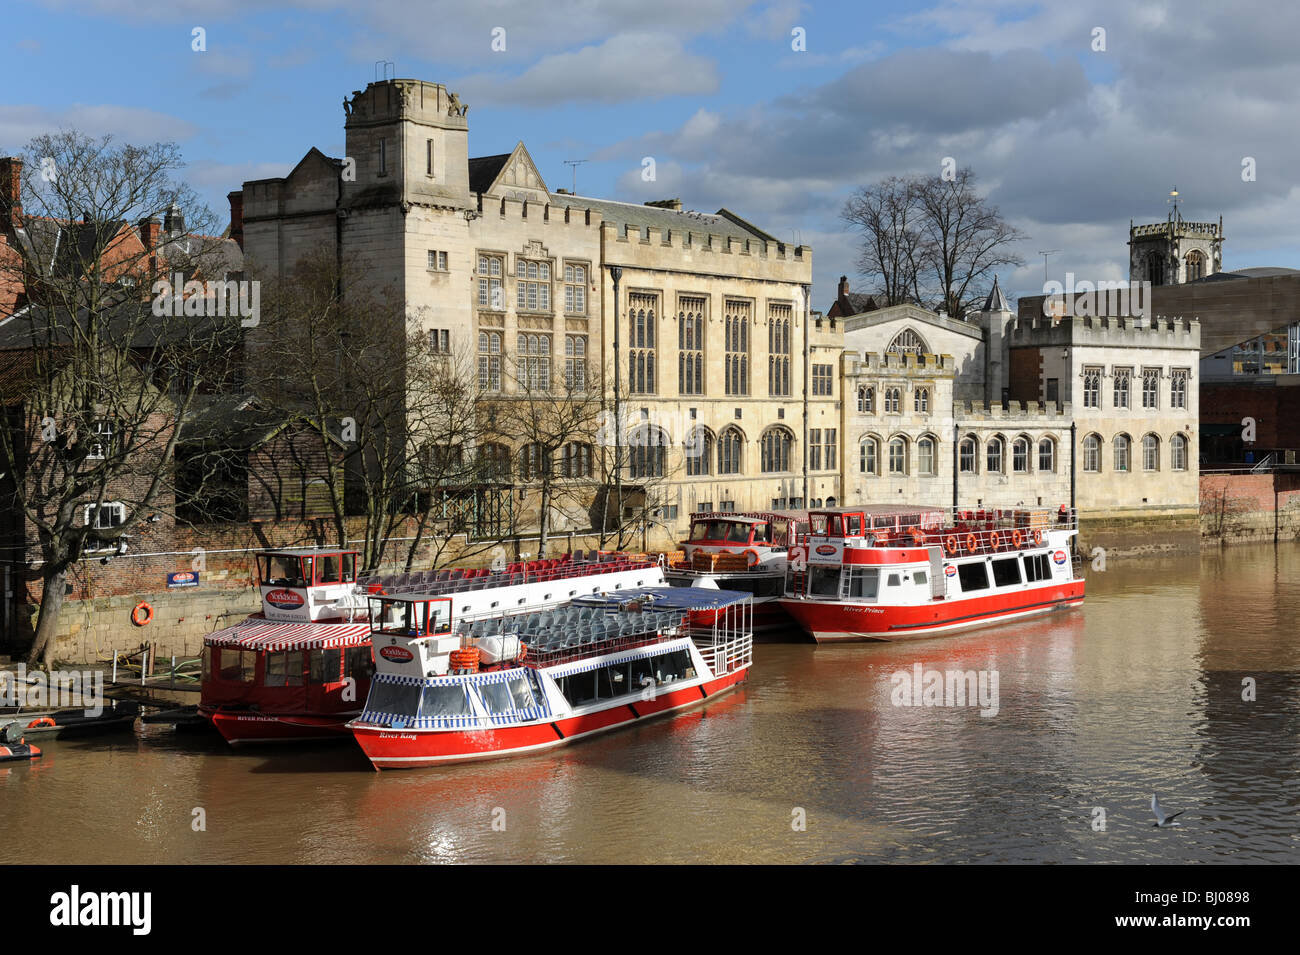 Boote auf dem Fluss Ouse an Lendal Bridge City of York in North Yorkshire England Uk Stockfoto